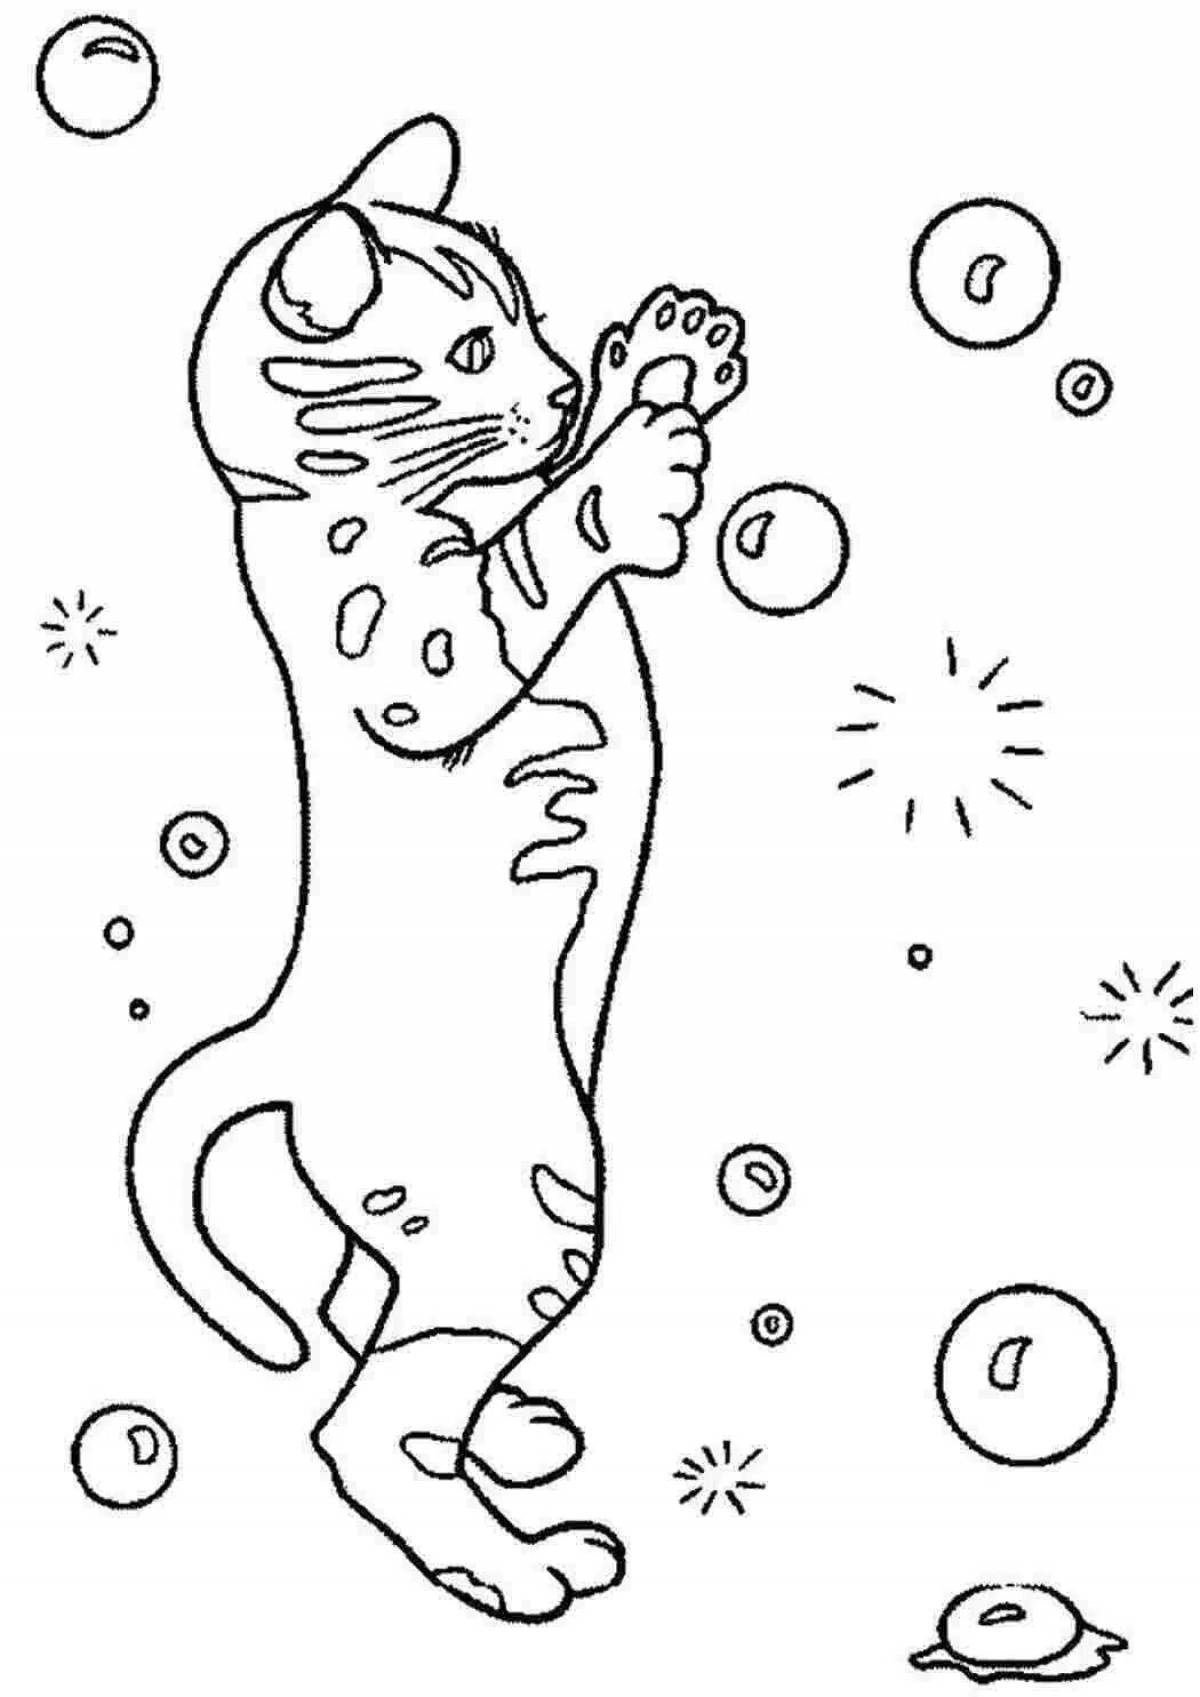 Bright Christmas cat coloring book